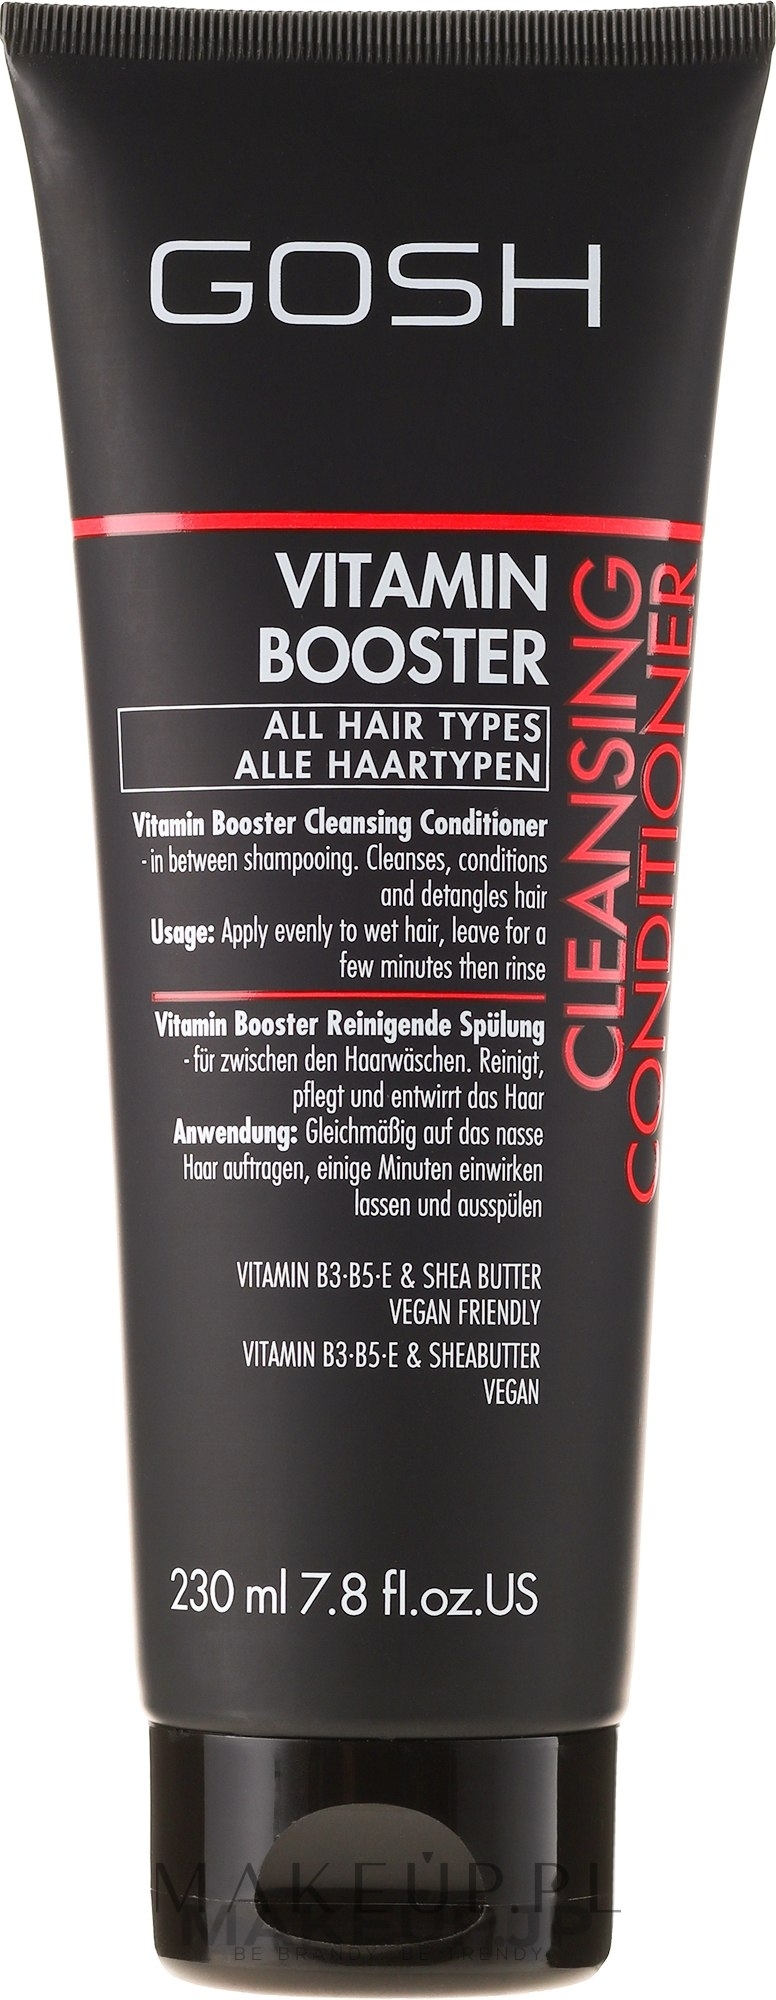 Cleansing Hair Conditioner - Gosh Vitamin Booster Cleansing Conditioner — photo 230 ml